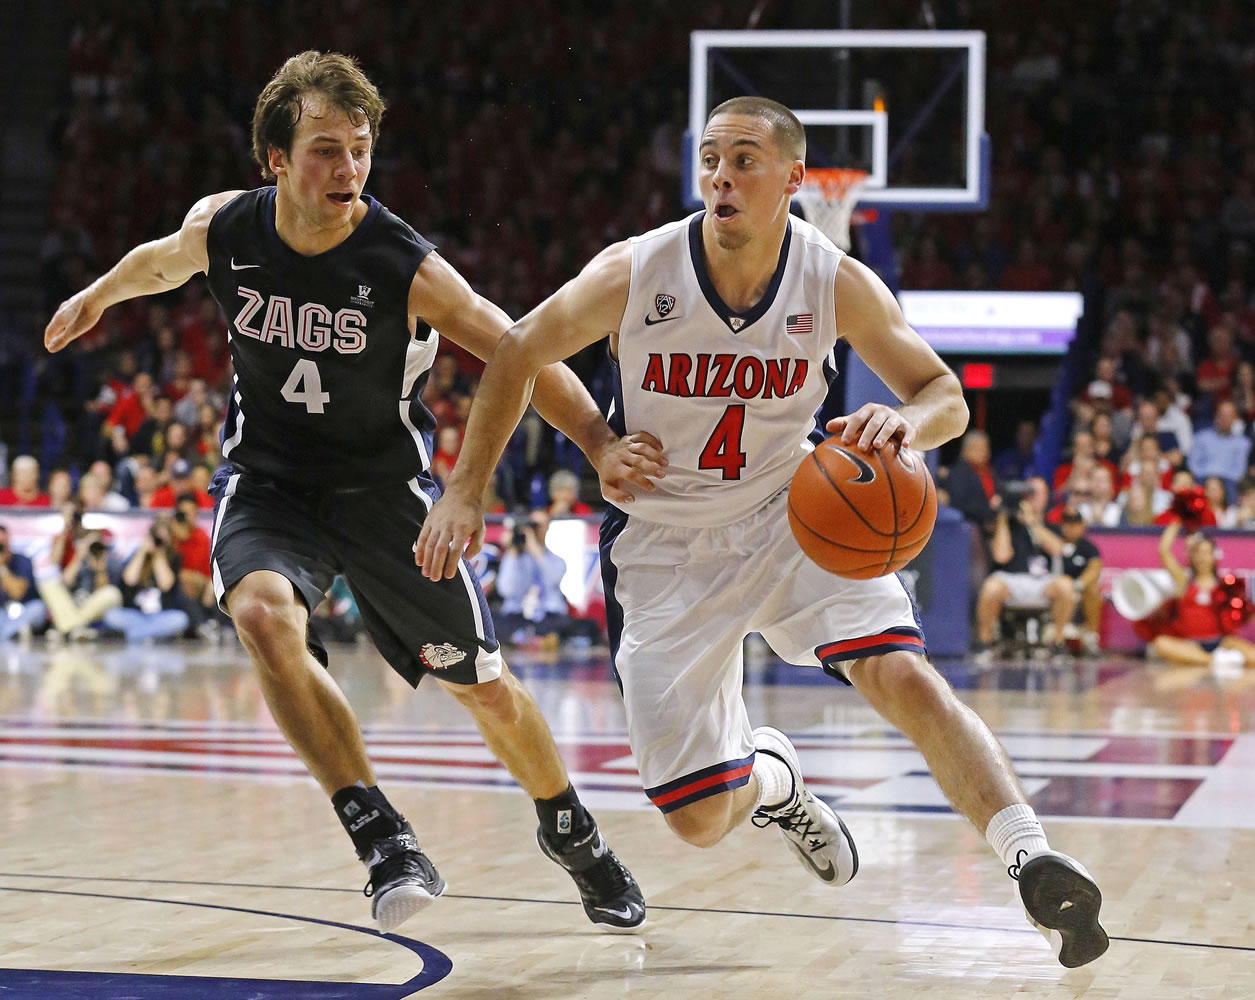 Arizona guard T.J. McConnell, right, drives to the net against Gonzaga guard Kevin Pangos during the first half Saturday, Dec. 6, 2014, in Tucson, Ariz.